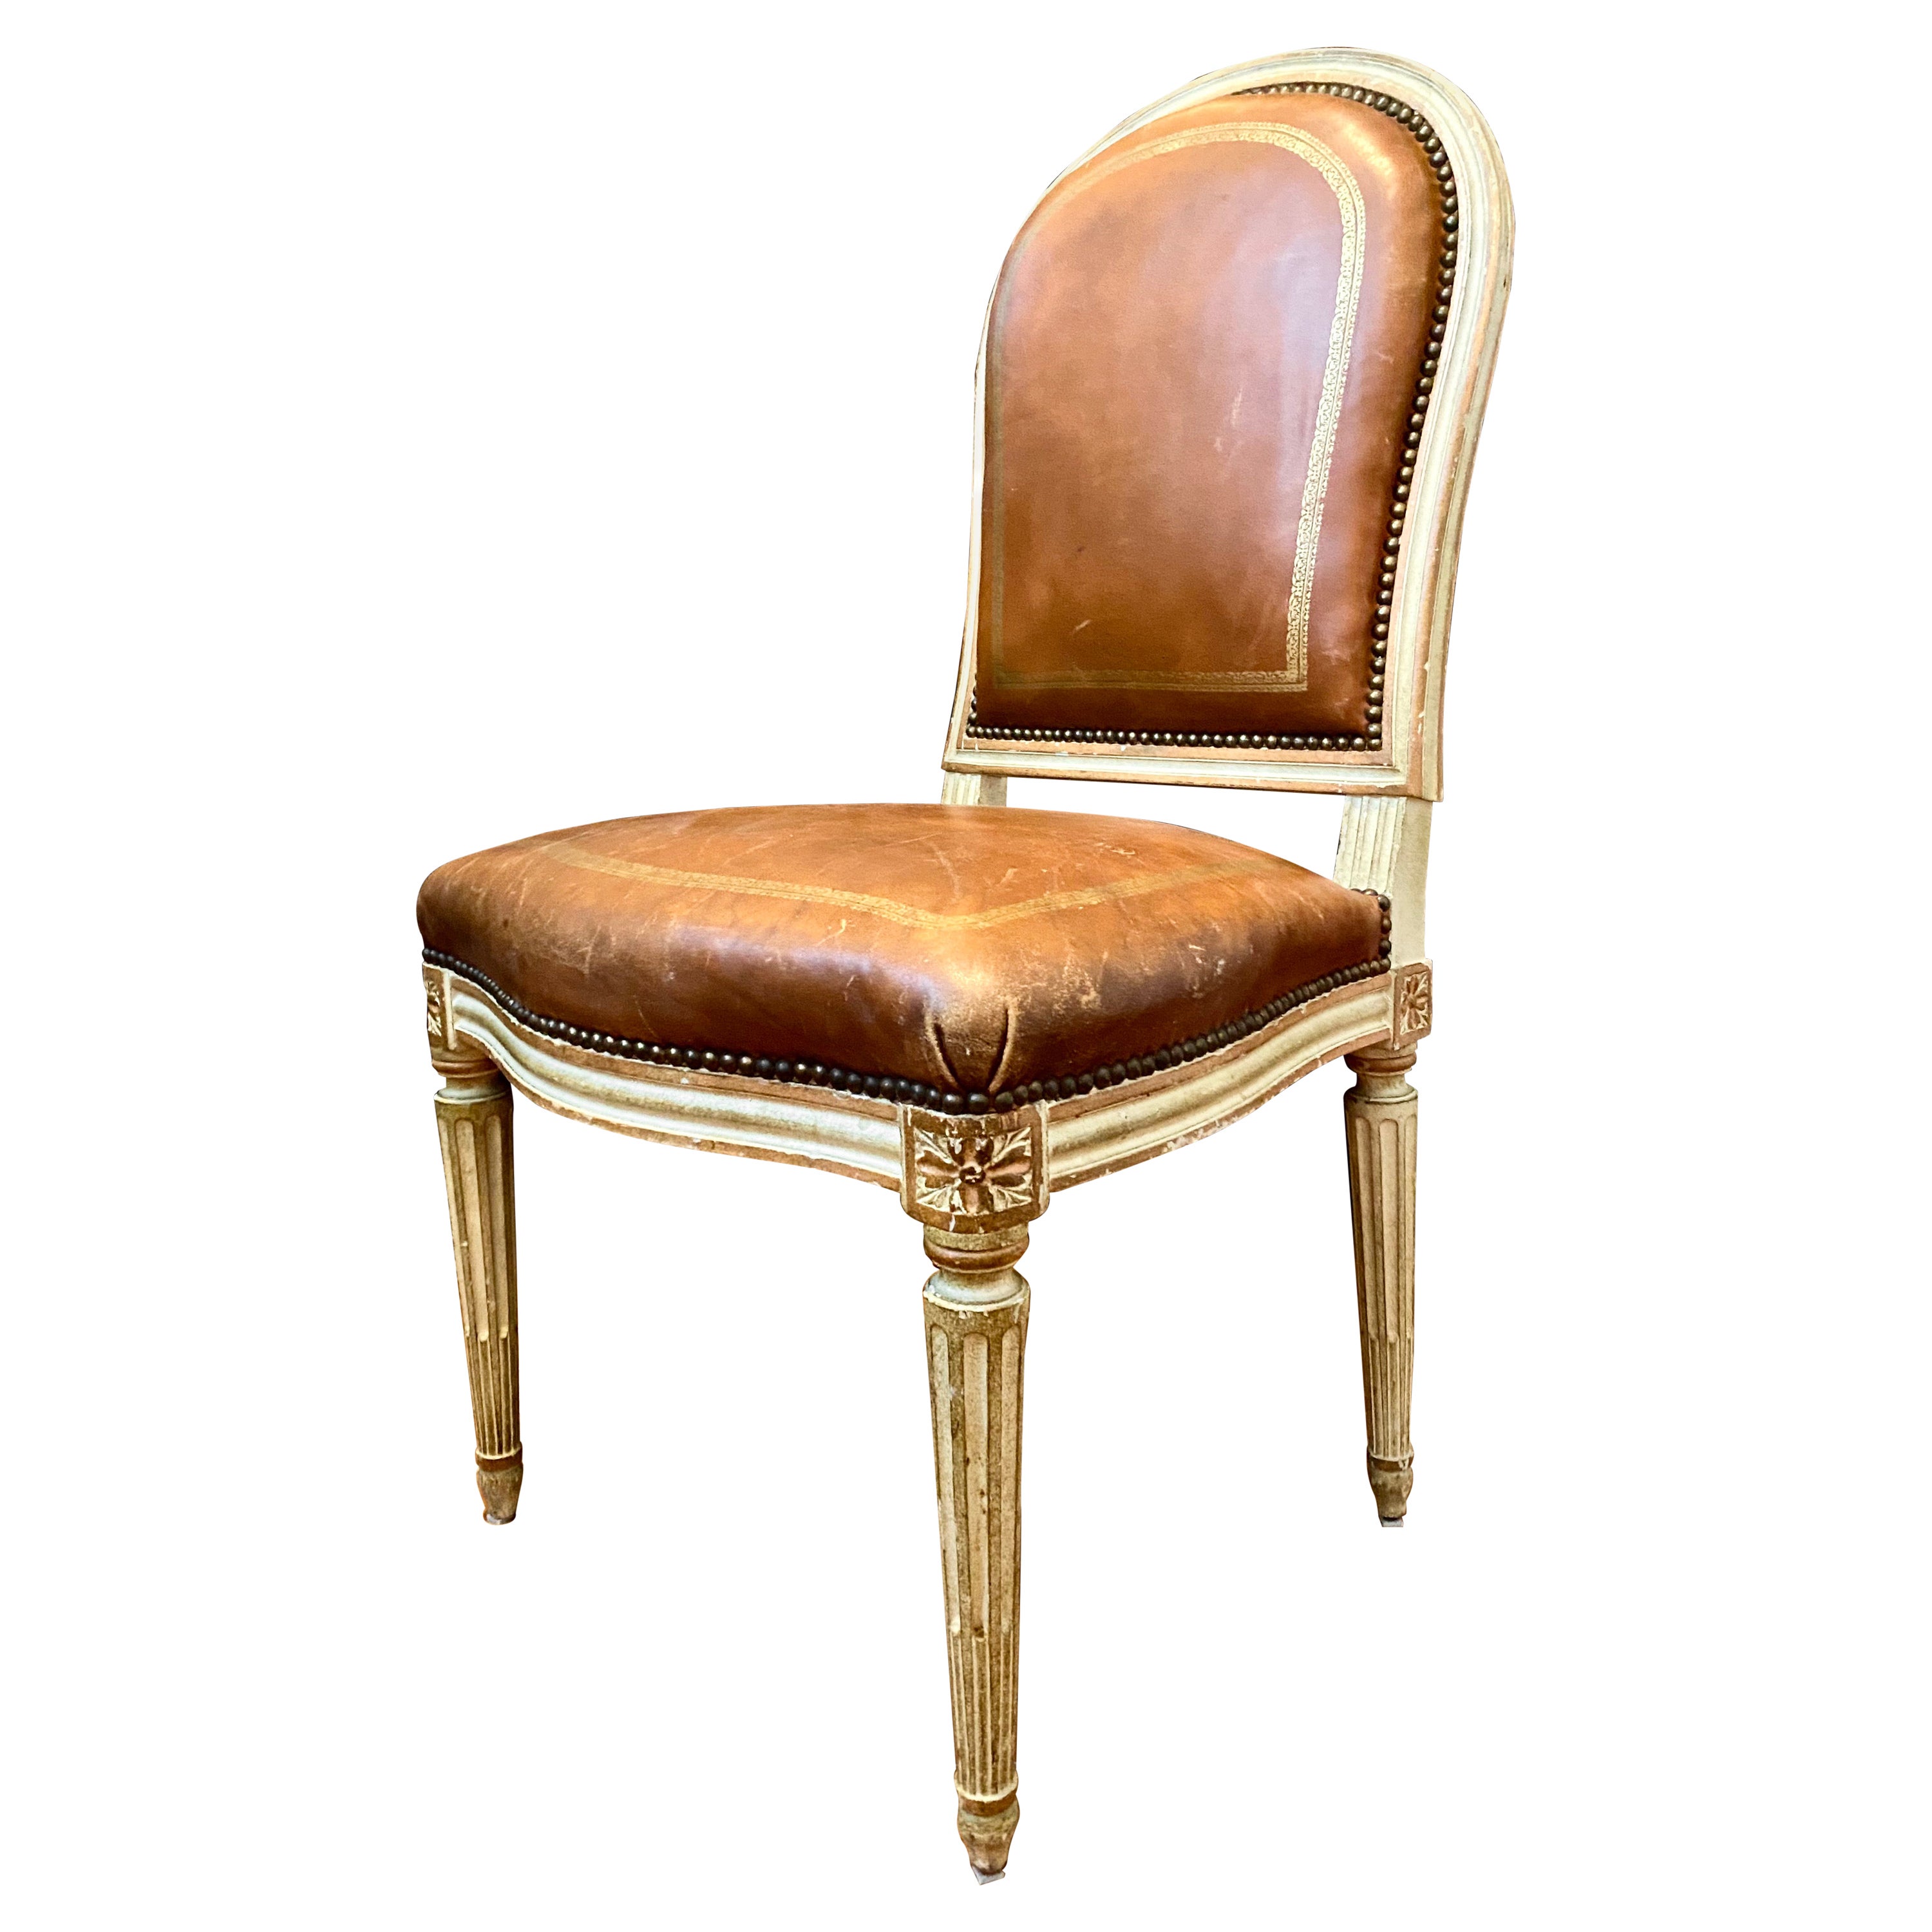 French Louis XVI Style Chair, Tooled and Gilt Leather